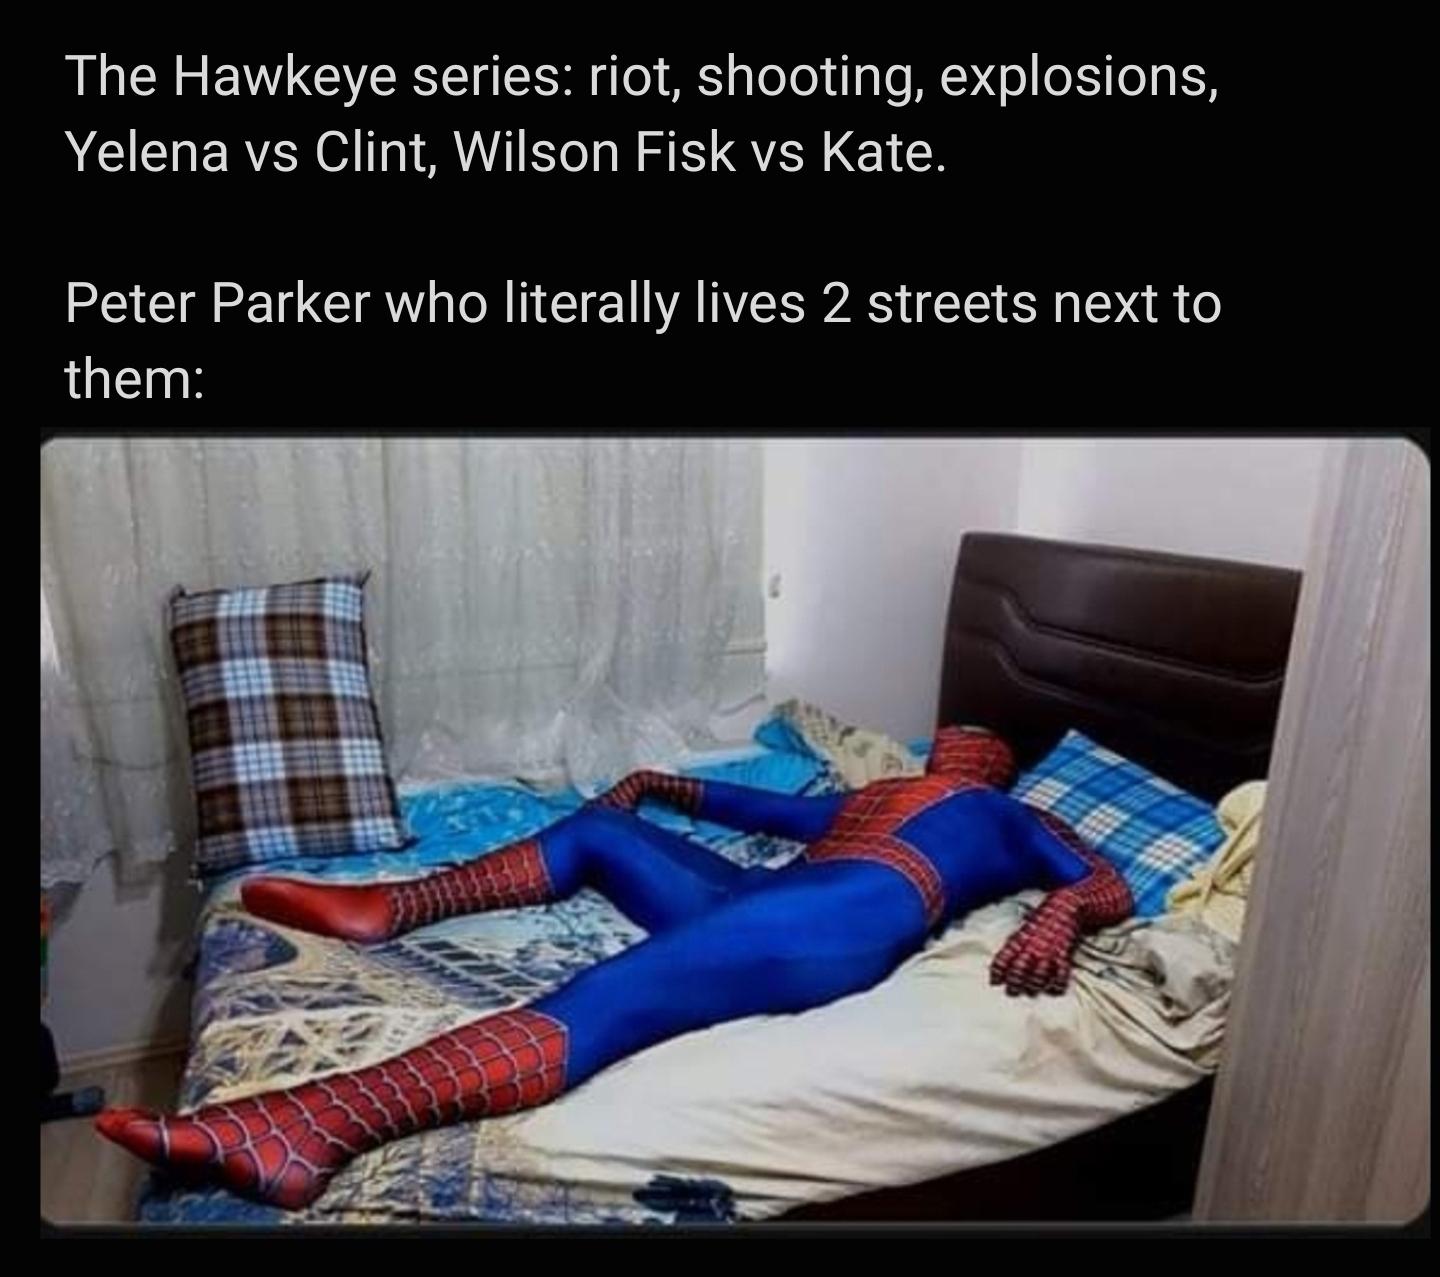 Hawkeye - The Hawkeye series riot, shooting, explosions, Yelena vs Clint, Wilson Fisk vs Kate. Peter Parker who literally lives 2 streets next to them